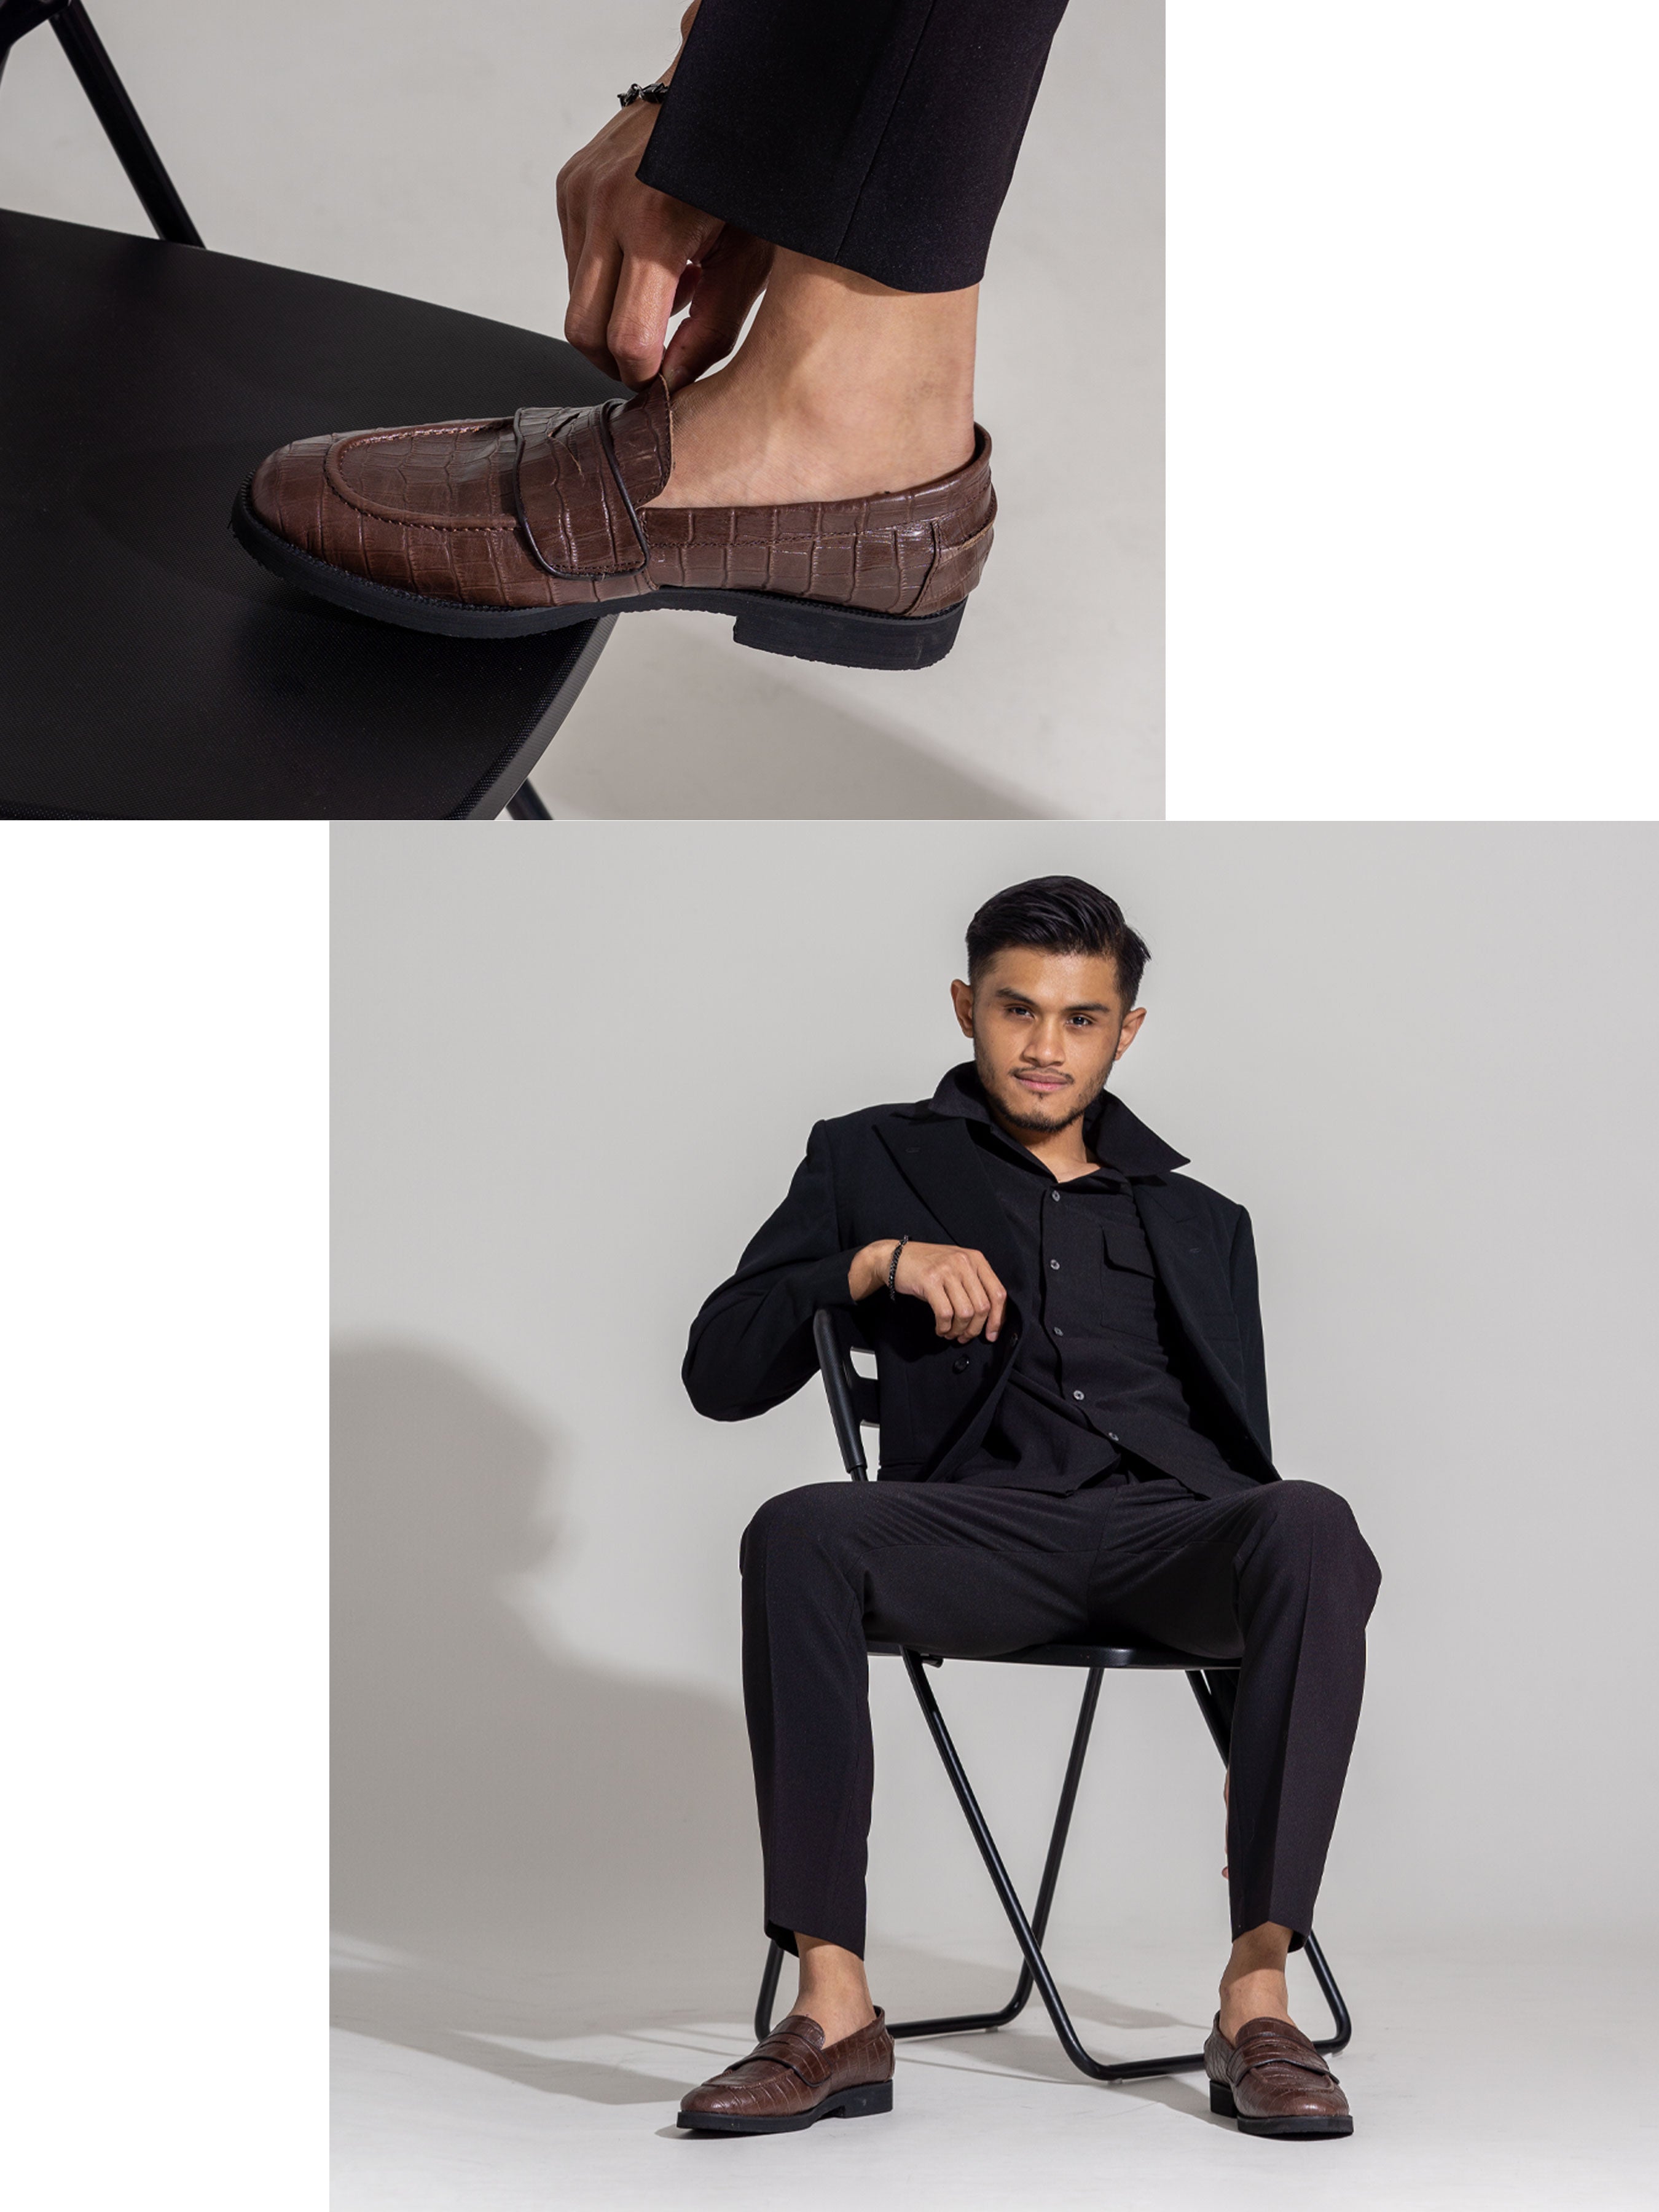 Wayne Penny Loafer - Coffee Croco Leather (Crepe Sole) - Zeve Shoes